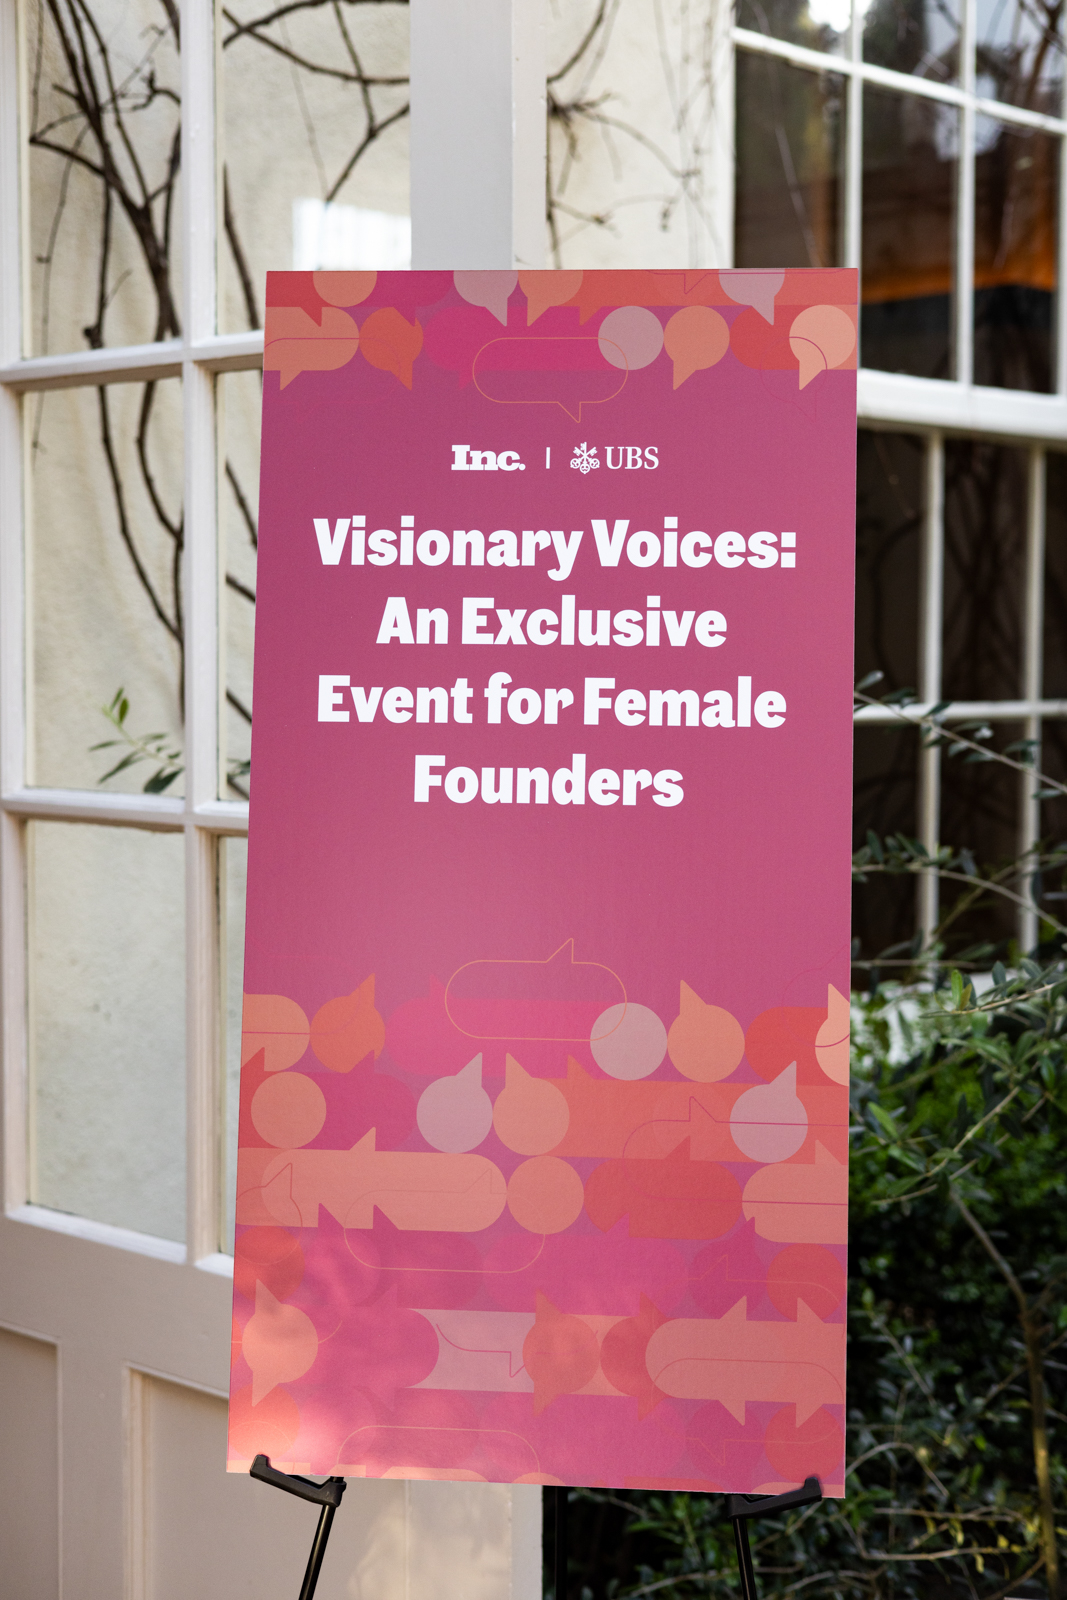 visionary voices: an exclusive event for female founders presented by INC.